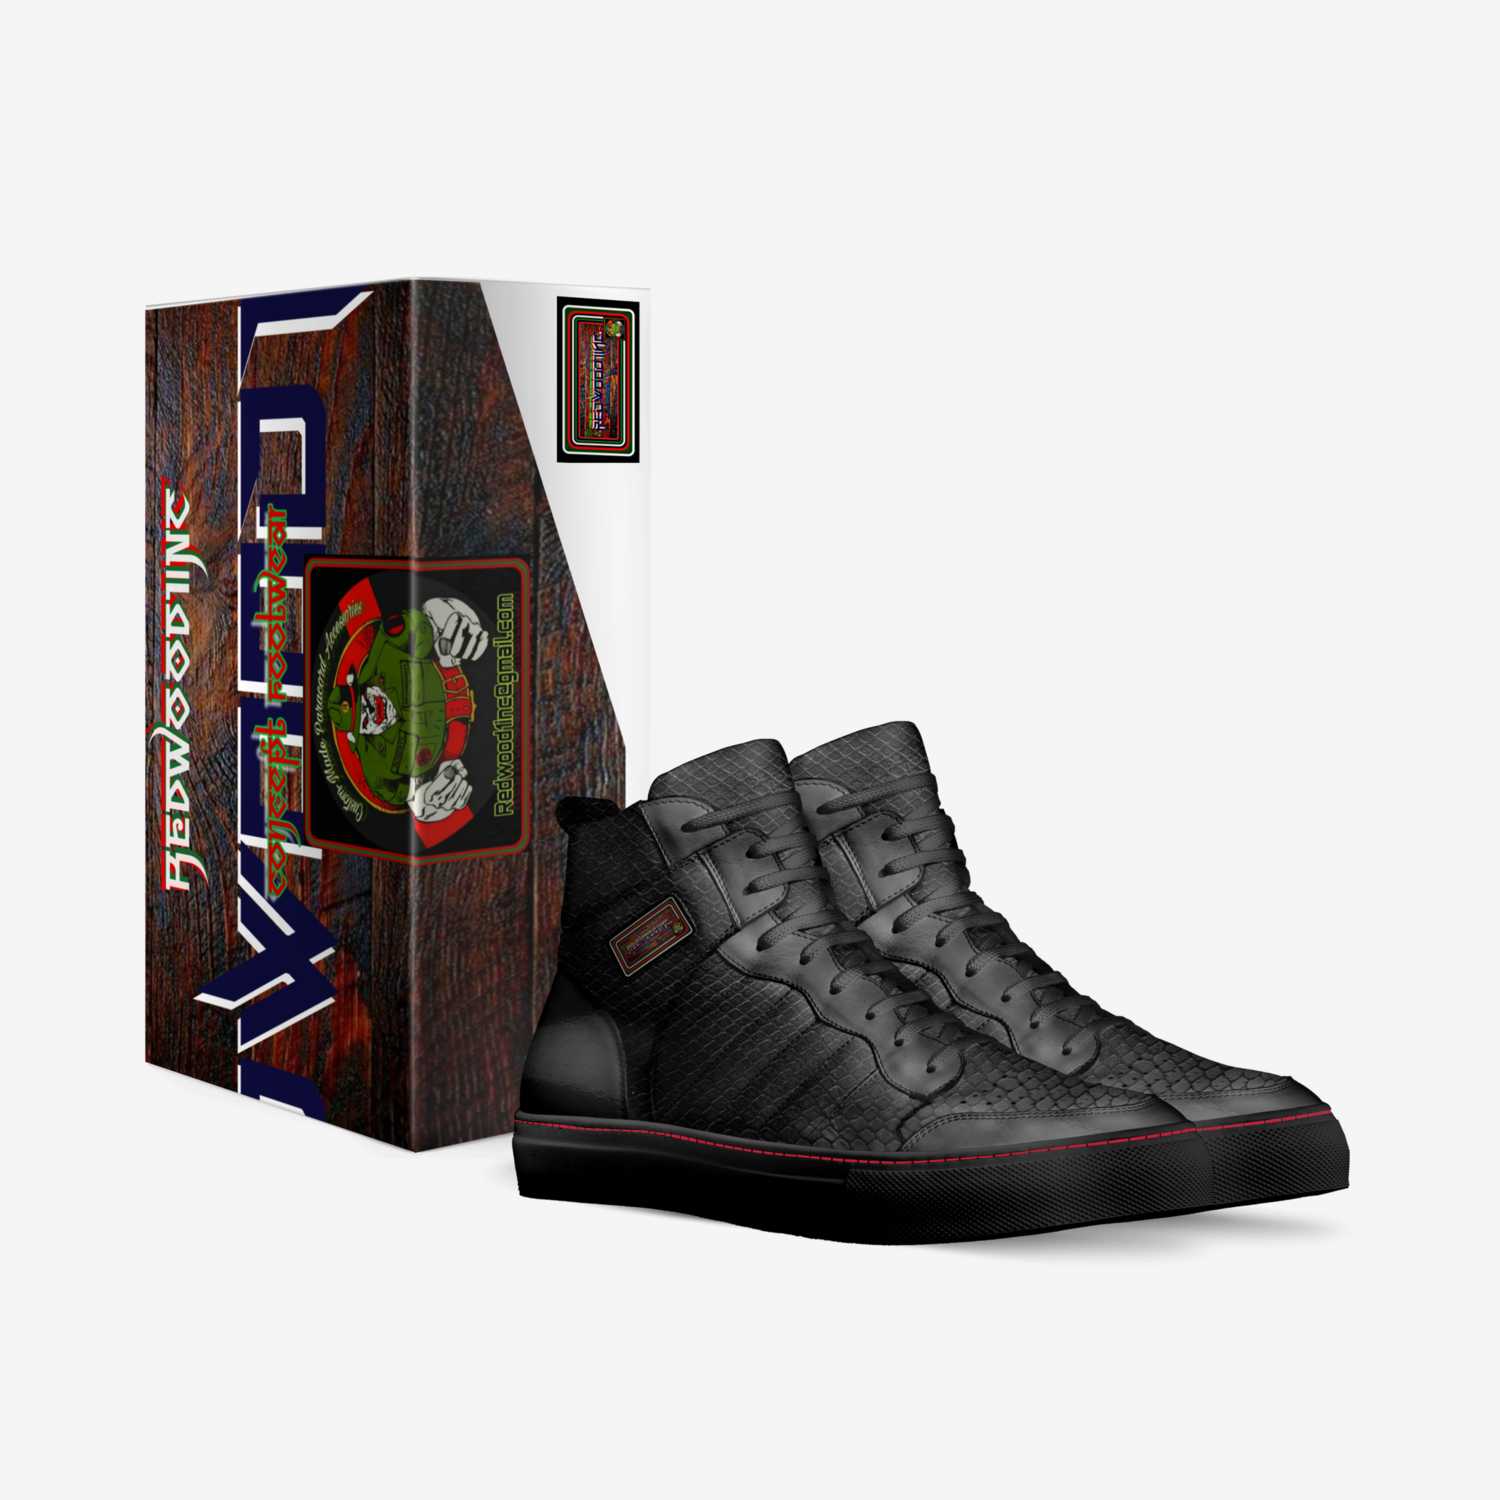 MADD DAWG 187 custom made in Italy shoes by Ronald Roberts | Box view